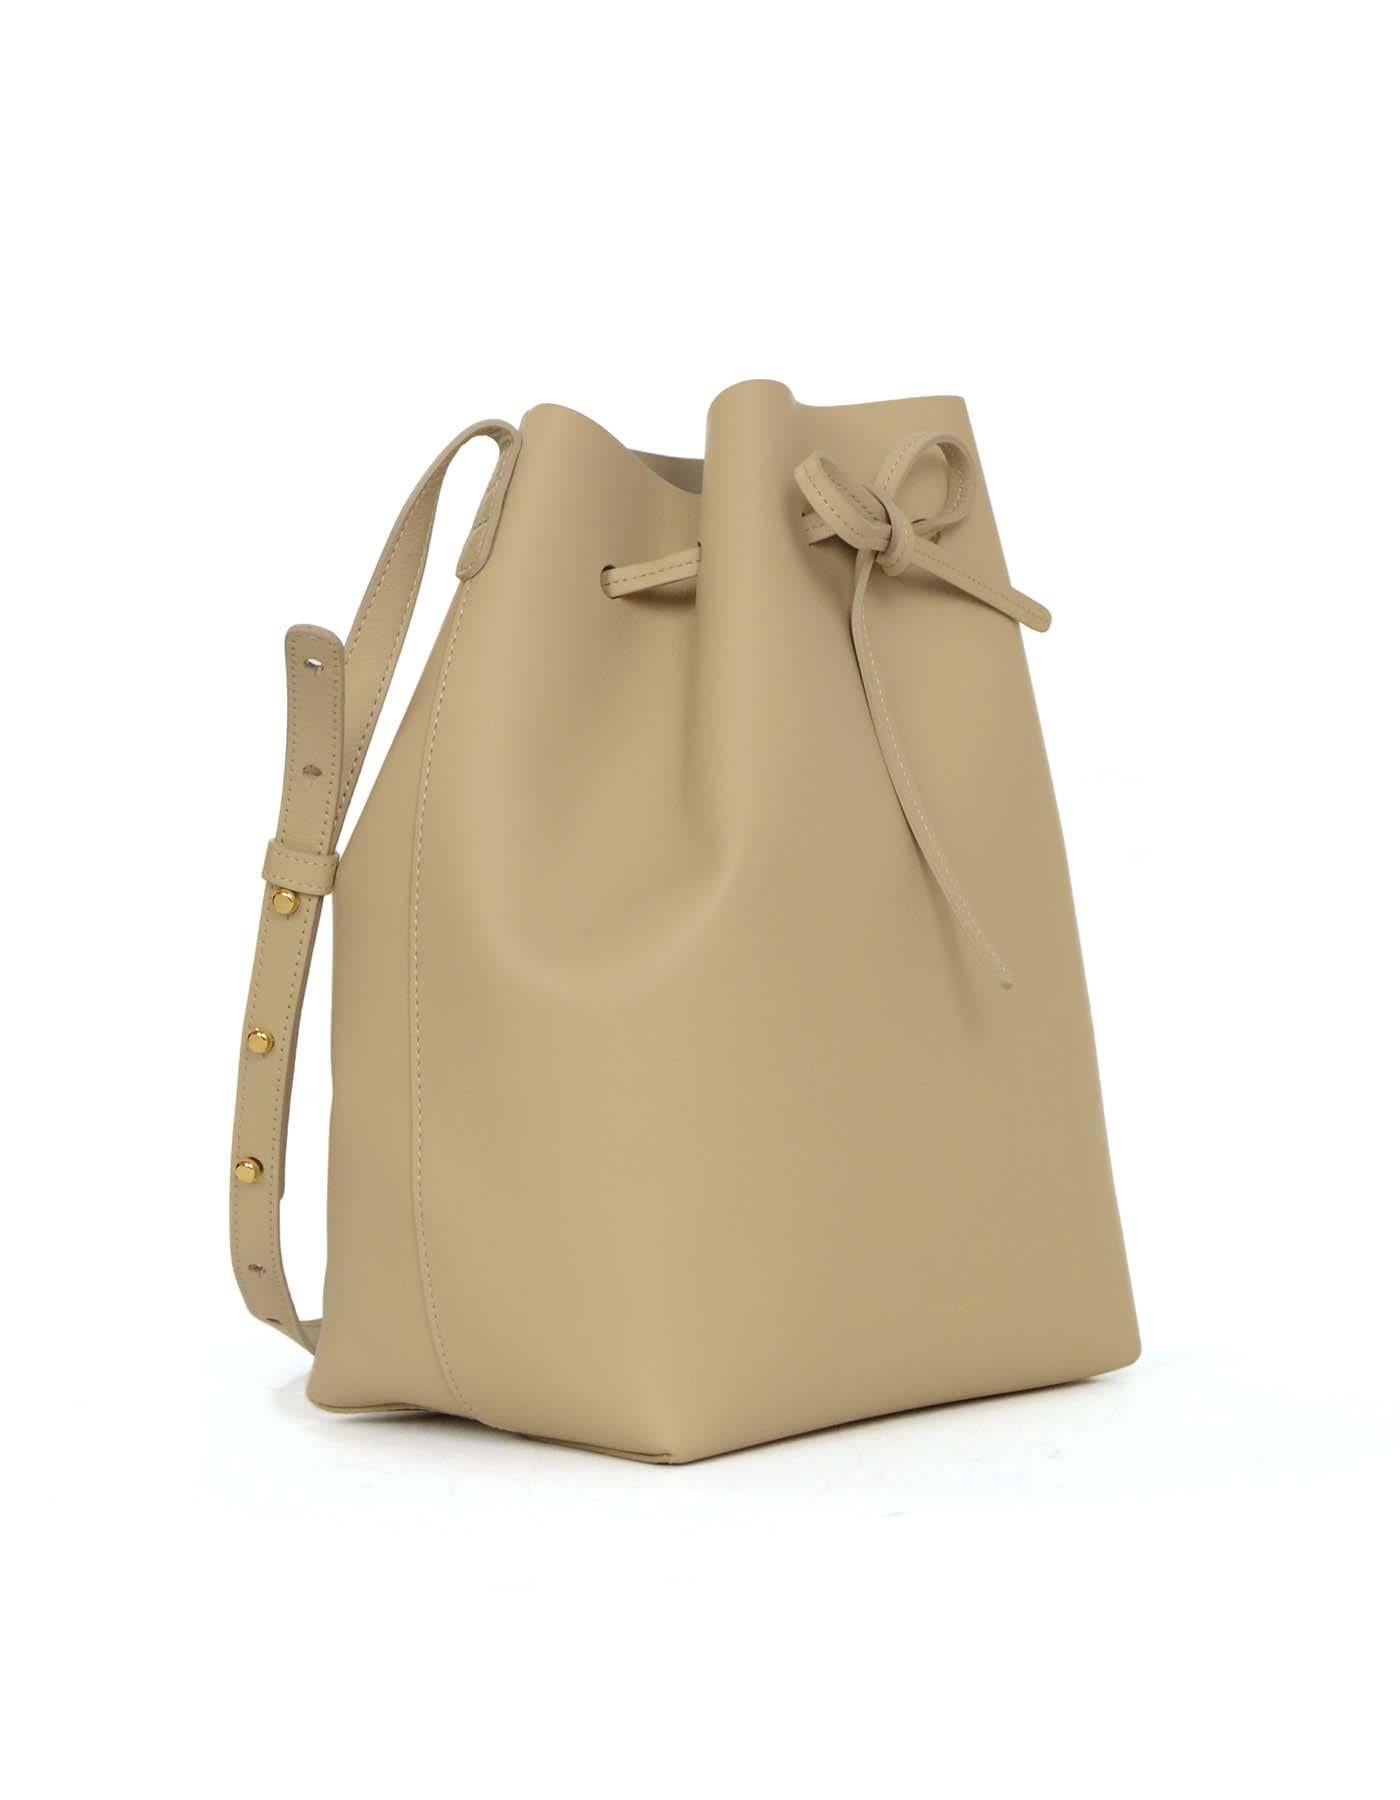 Mansur Gavriel Nude Large Drawstring Bucket Bag 
Features adjustable shoulder strap and removable insert pouch
Made In: Italy
Color: Nude
Hardware: Goldtone
Materials: Leather
Lining: Nude leather
Closure/Opening: Drawstring closure
Exterior